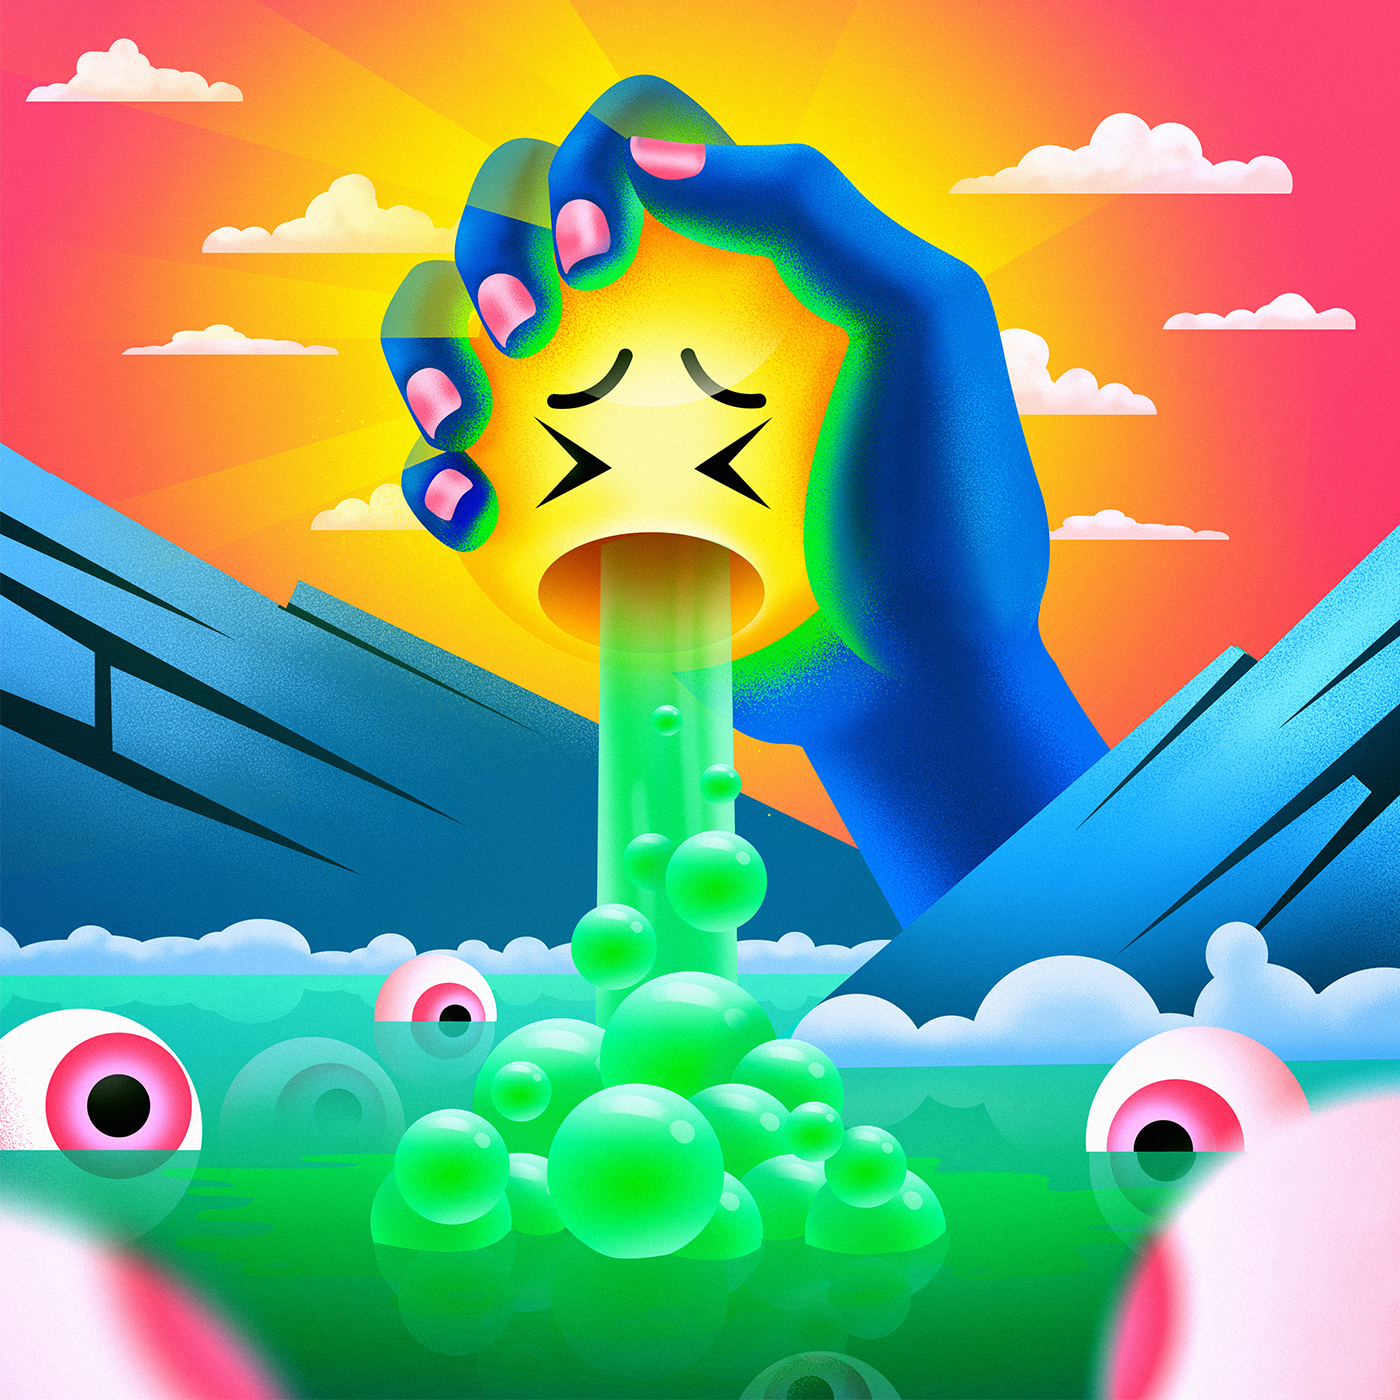 The-Squeeze-Behance